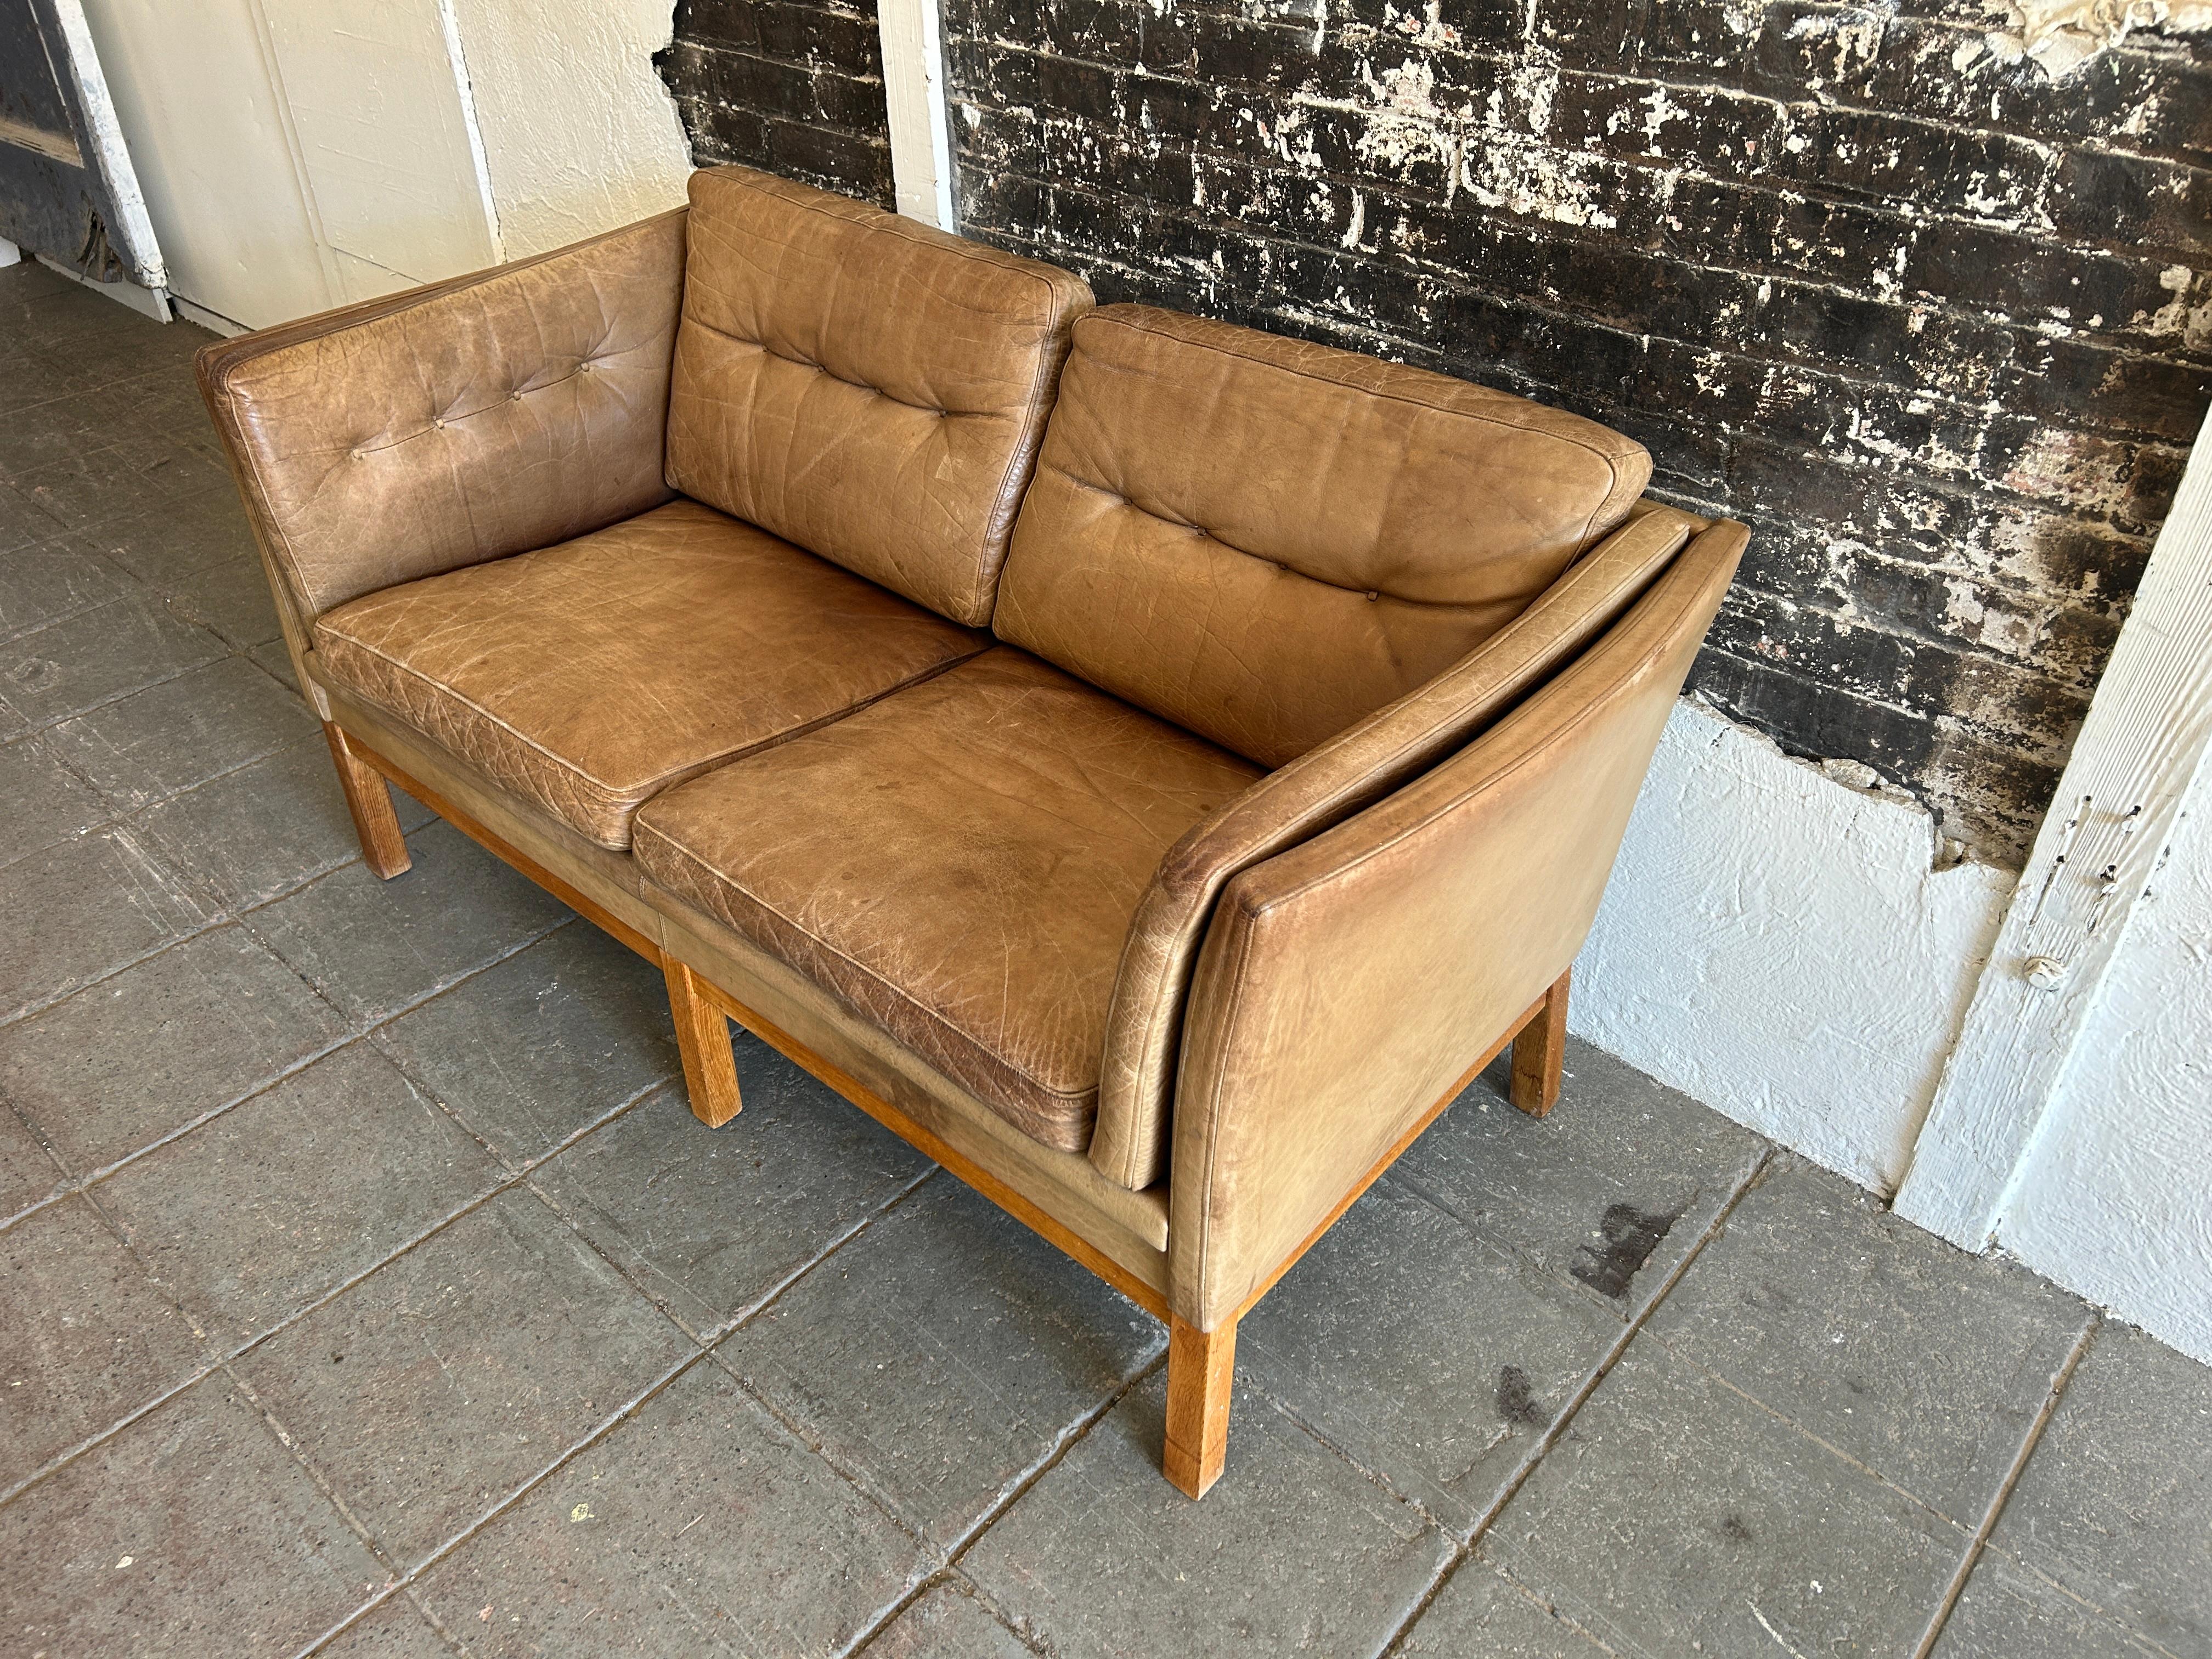 Woodwork Mid Century Danish Modern Brown Leather 2 Seat Sofa oak legs faded with patina 